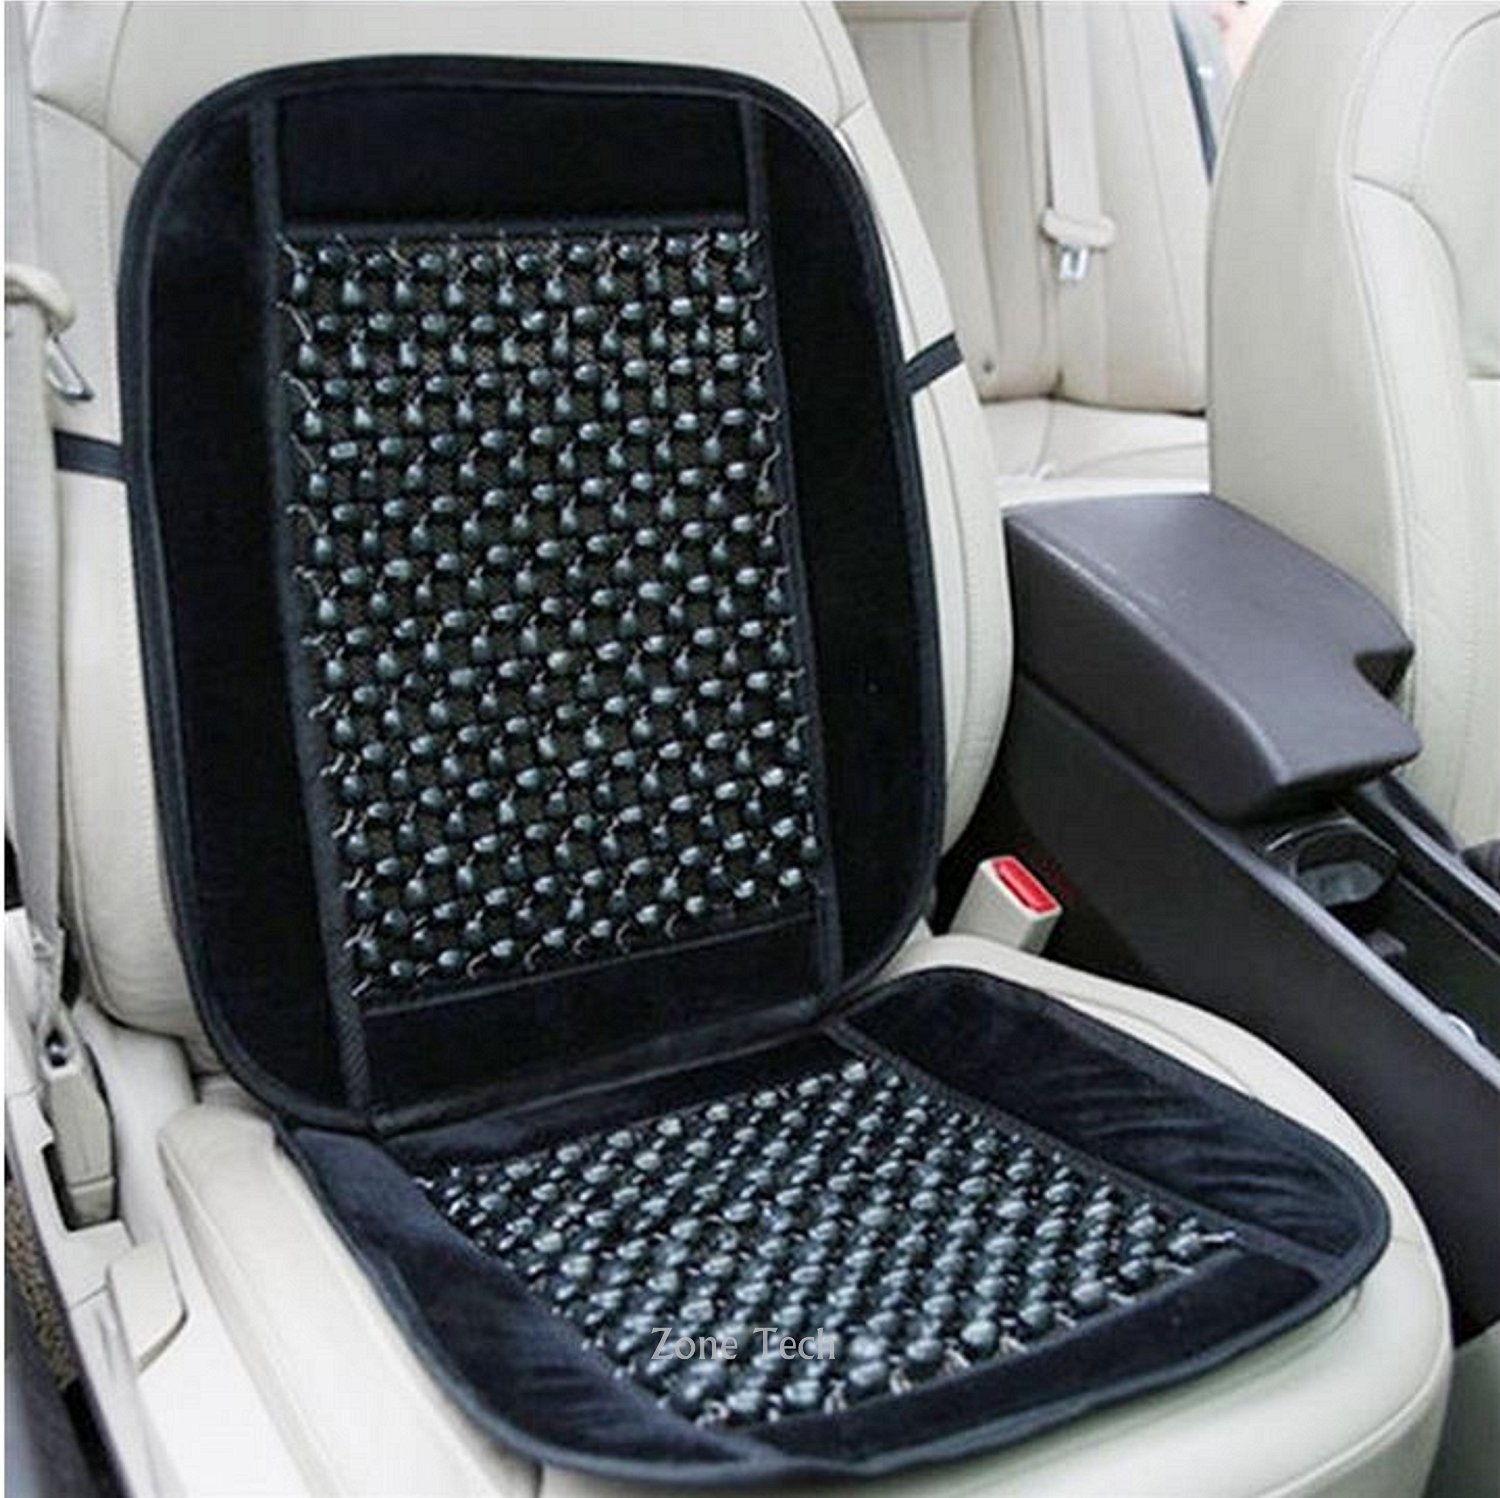 Black Wood Beaded Seat Cushion By Zone Tech 